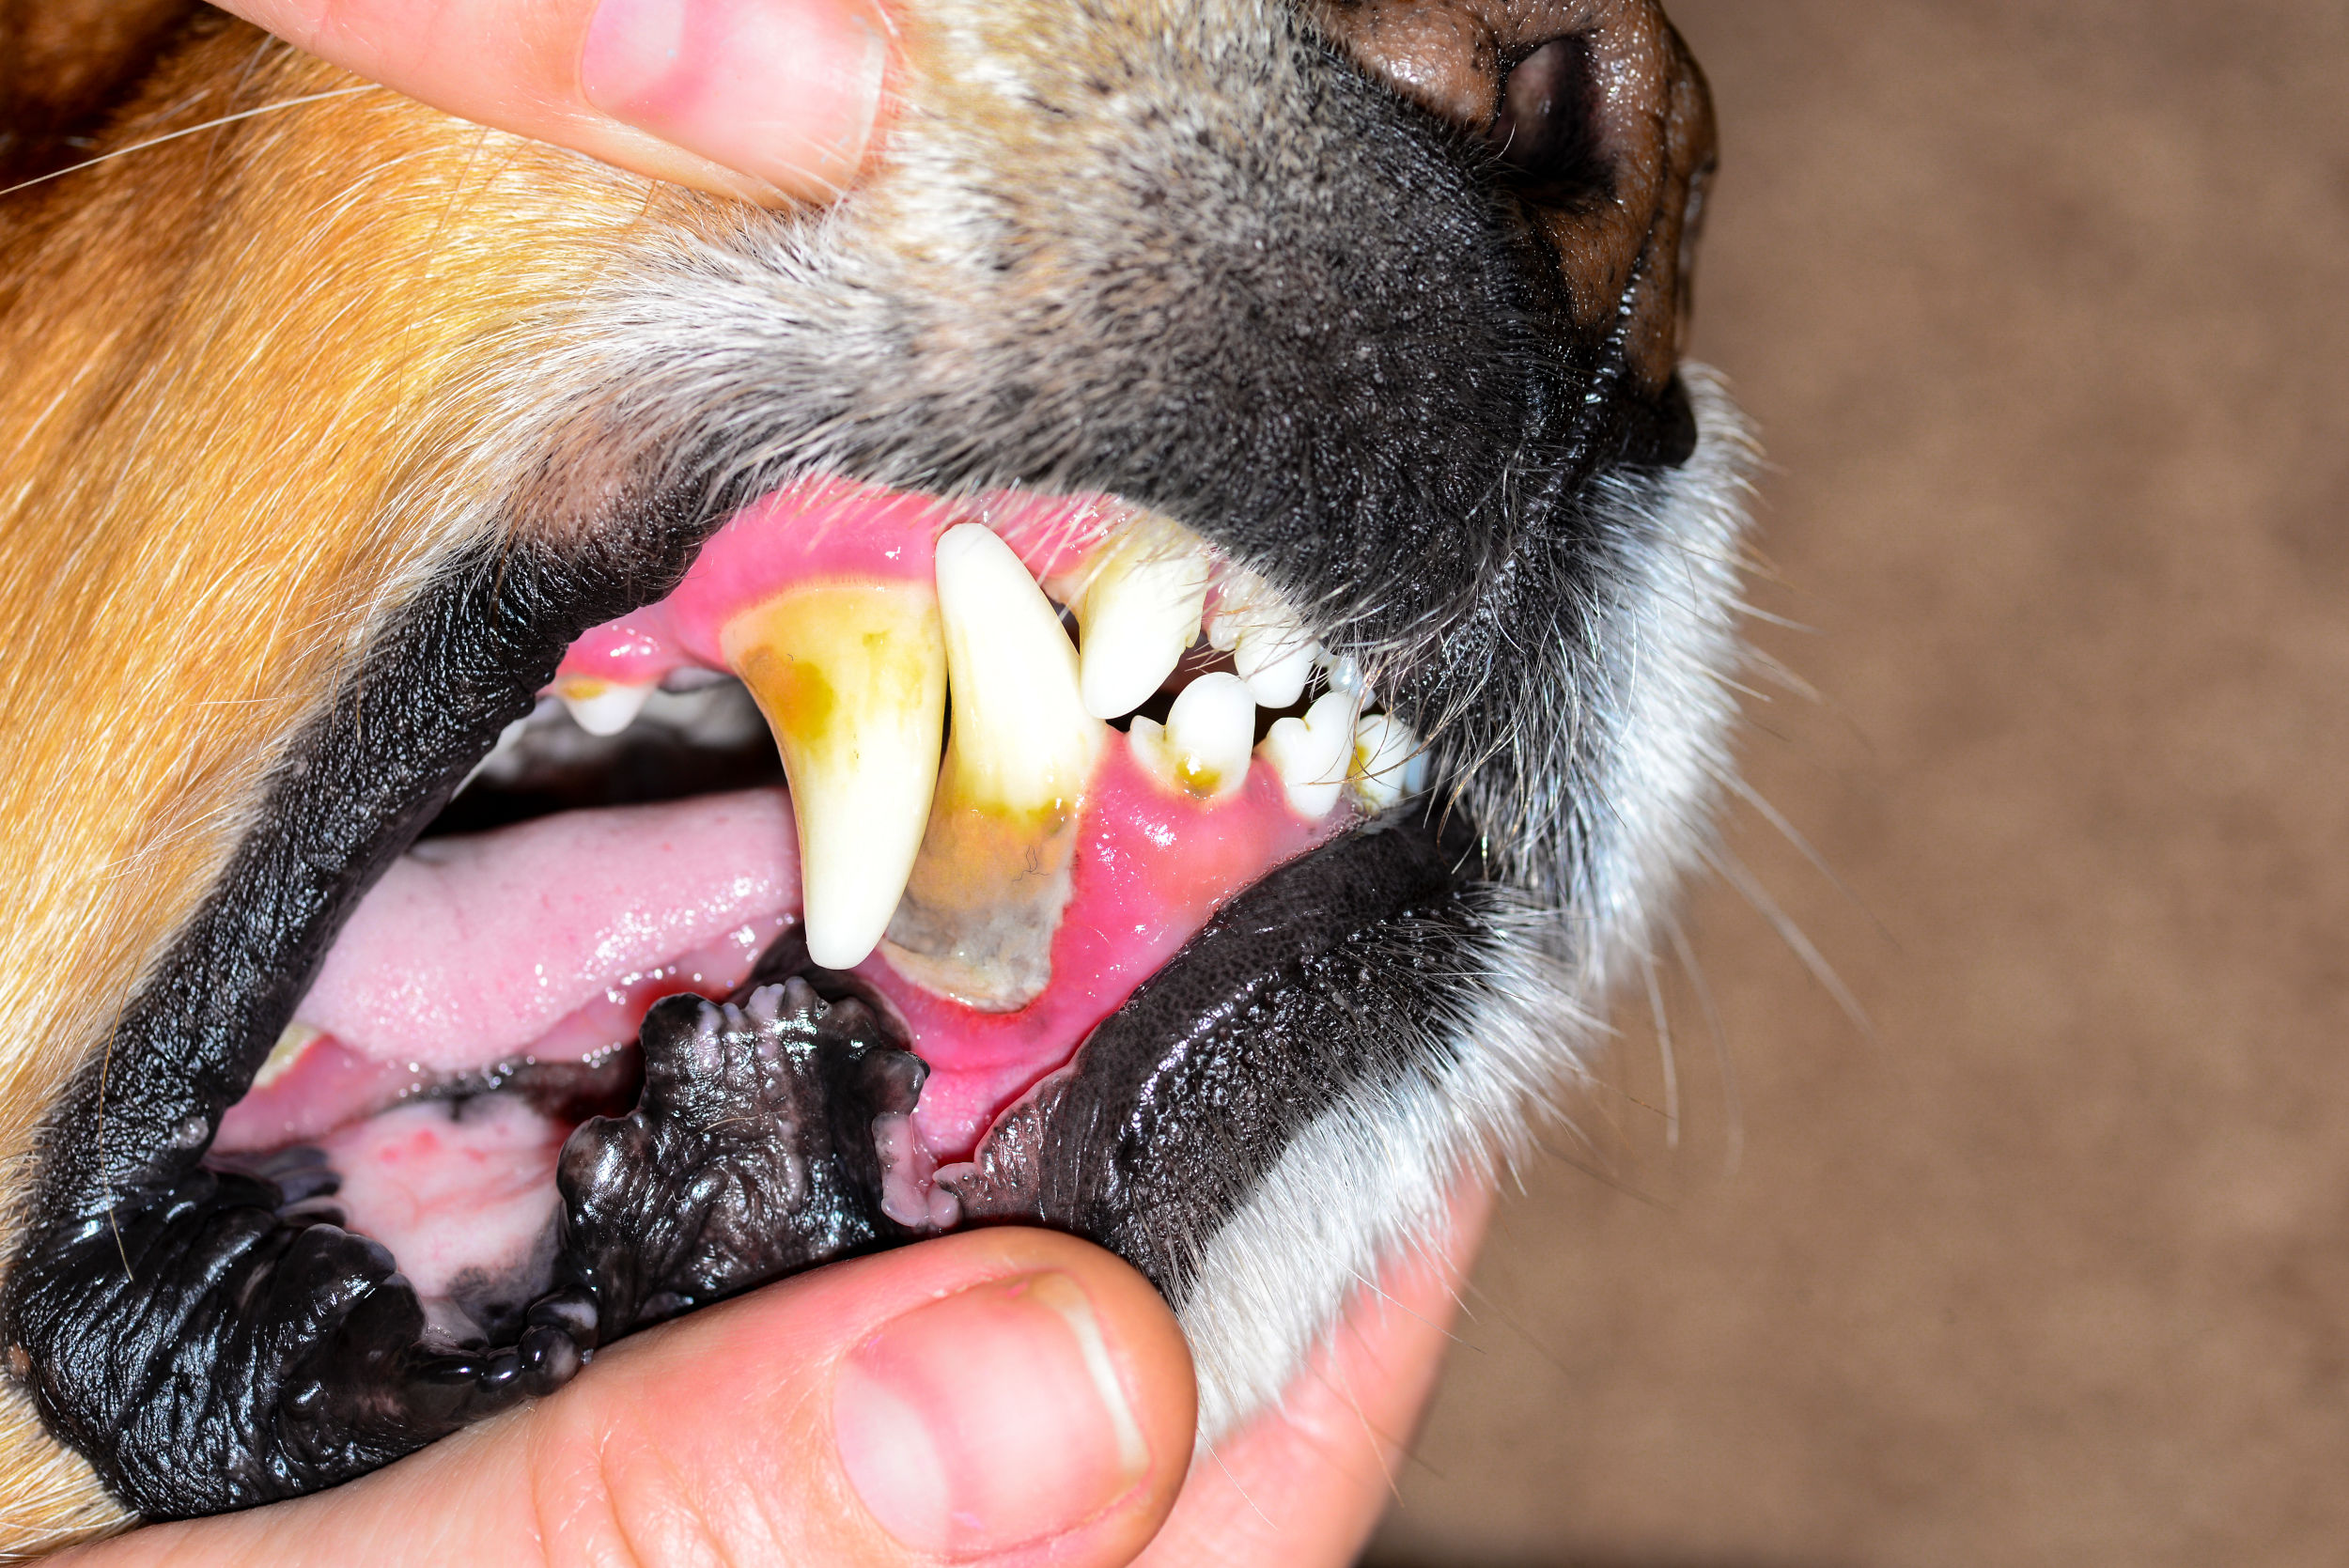 The facts about dental disease in dogs (Canine Periodontal Disease